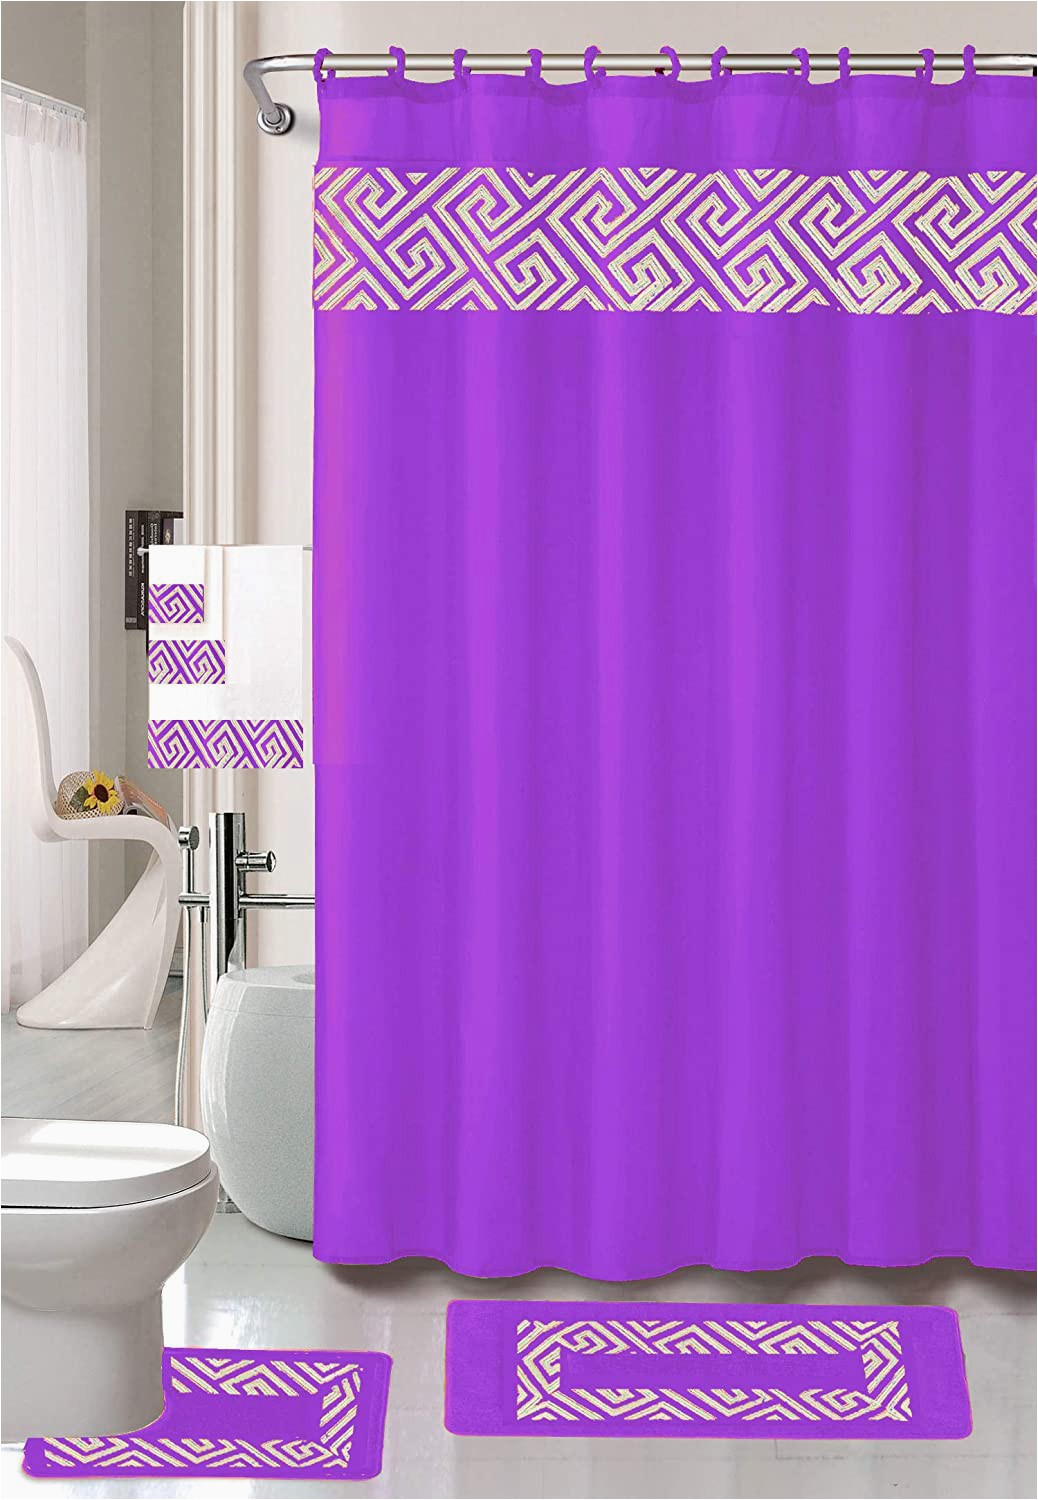 Purple Bath towels and Rugs Luxury Home Collection 18 Piece Embroidery Non Slip Bathroom Rug Set Set Includes Bath Rug Mat Contour Mat Shower Curtain towels and Hooks